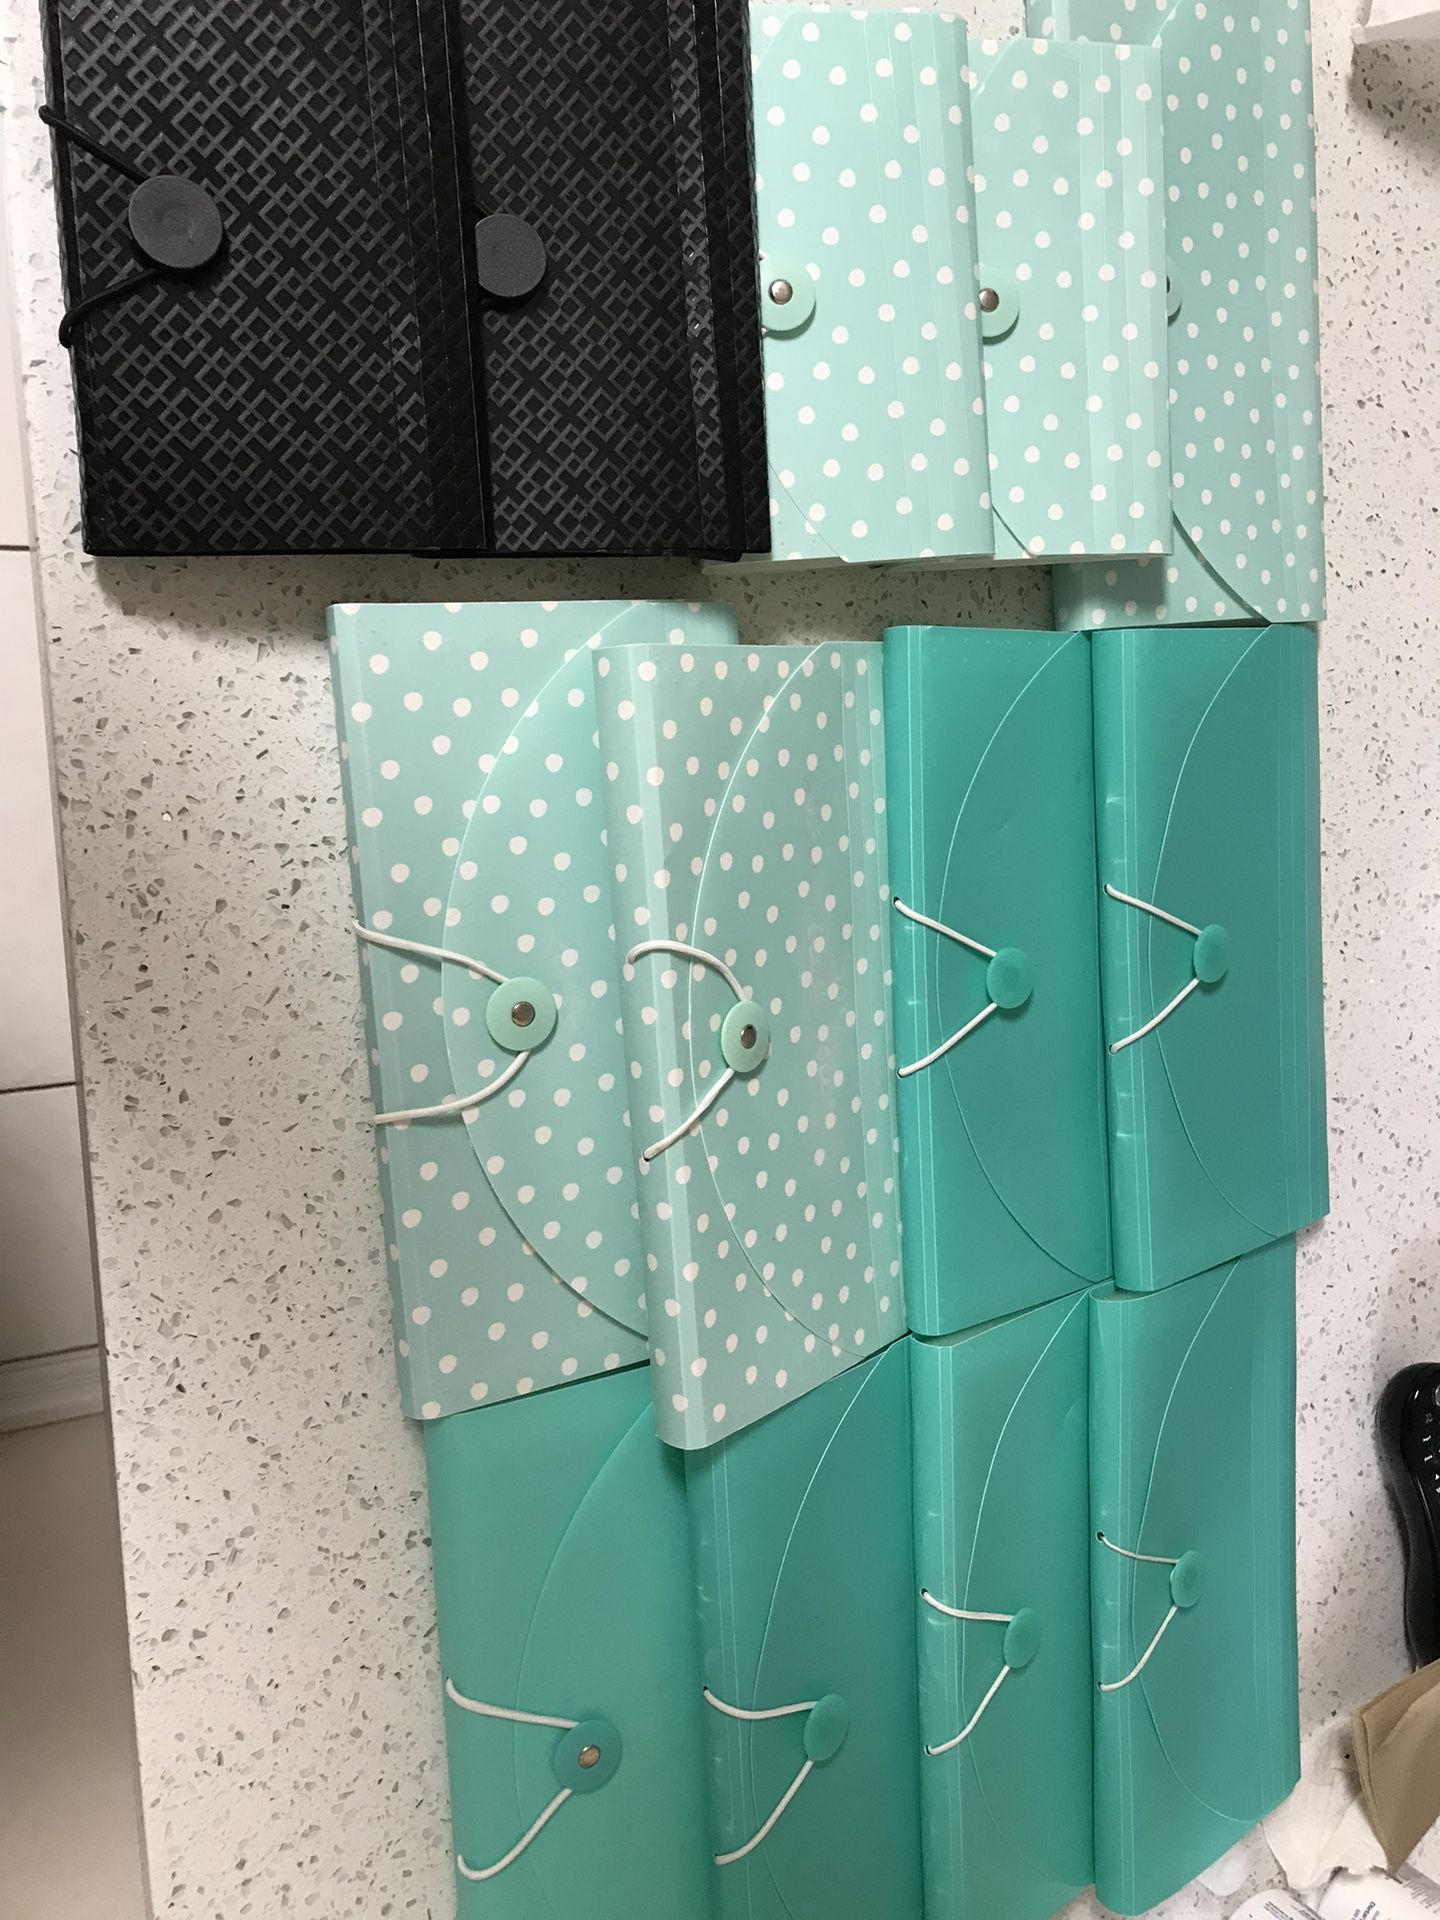 13 Pockets Accordion File Organizers.  9 Files For 13 Pockets And 4 Files For 7 Pockets 